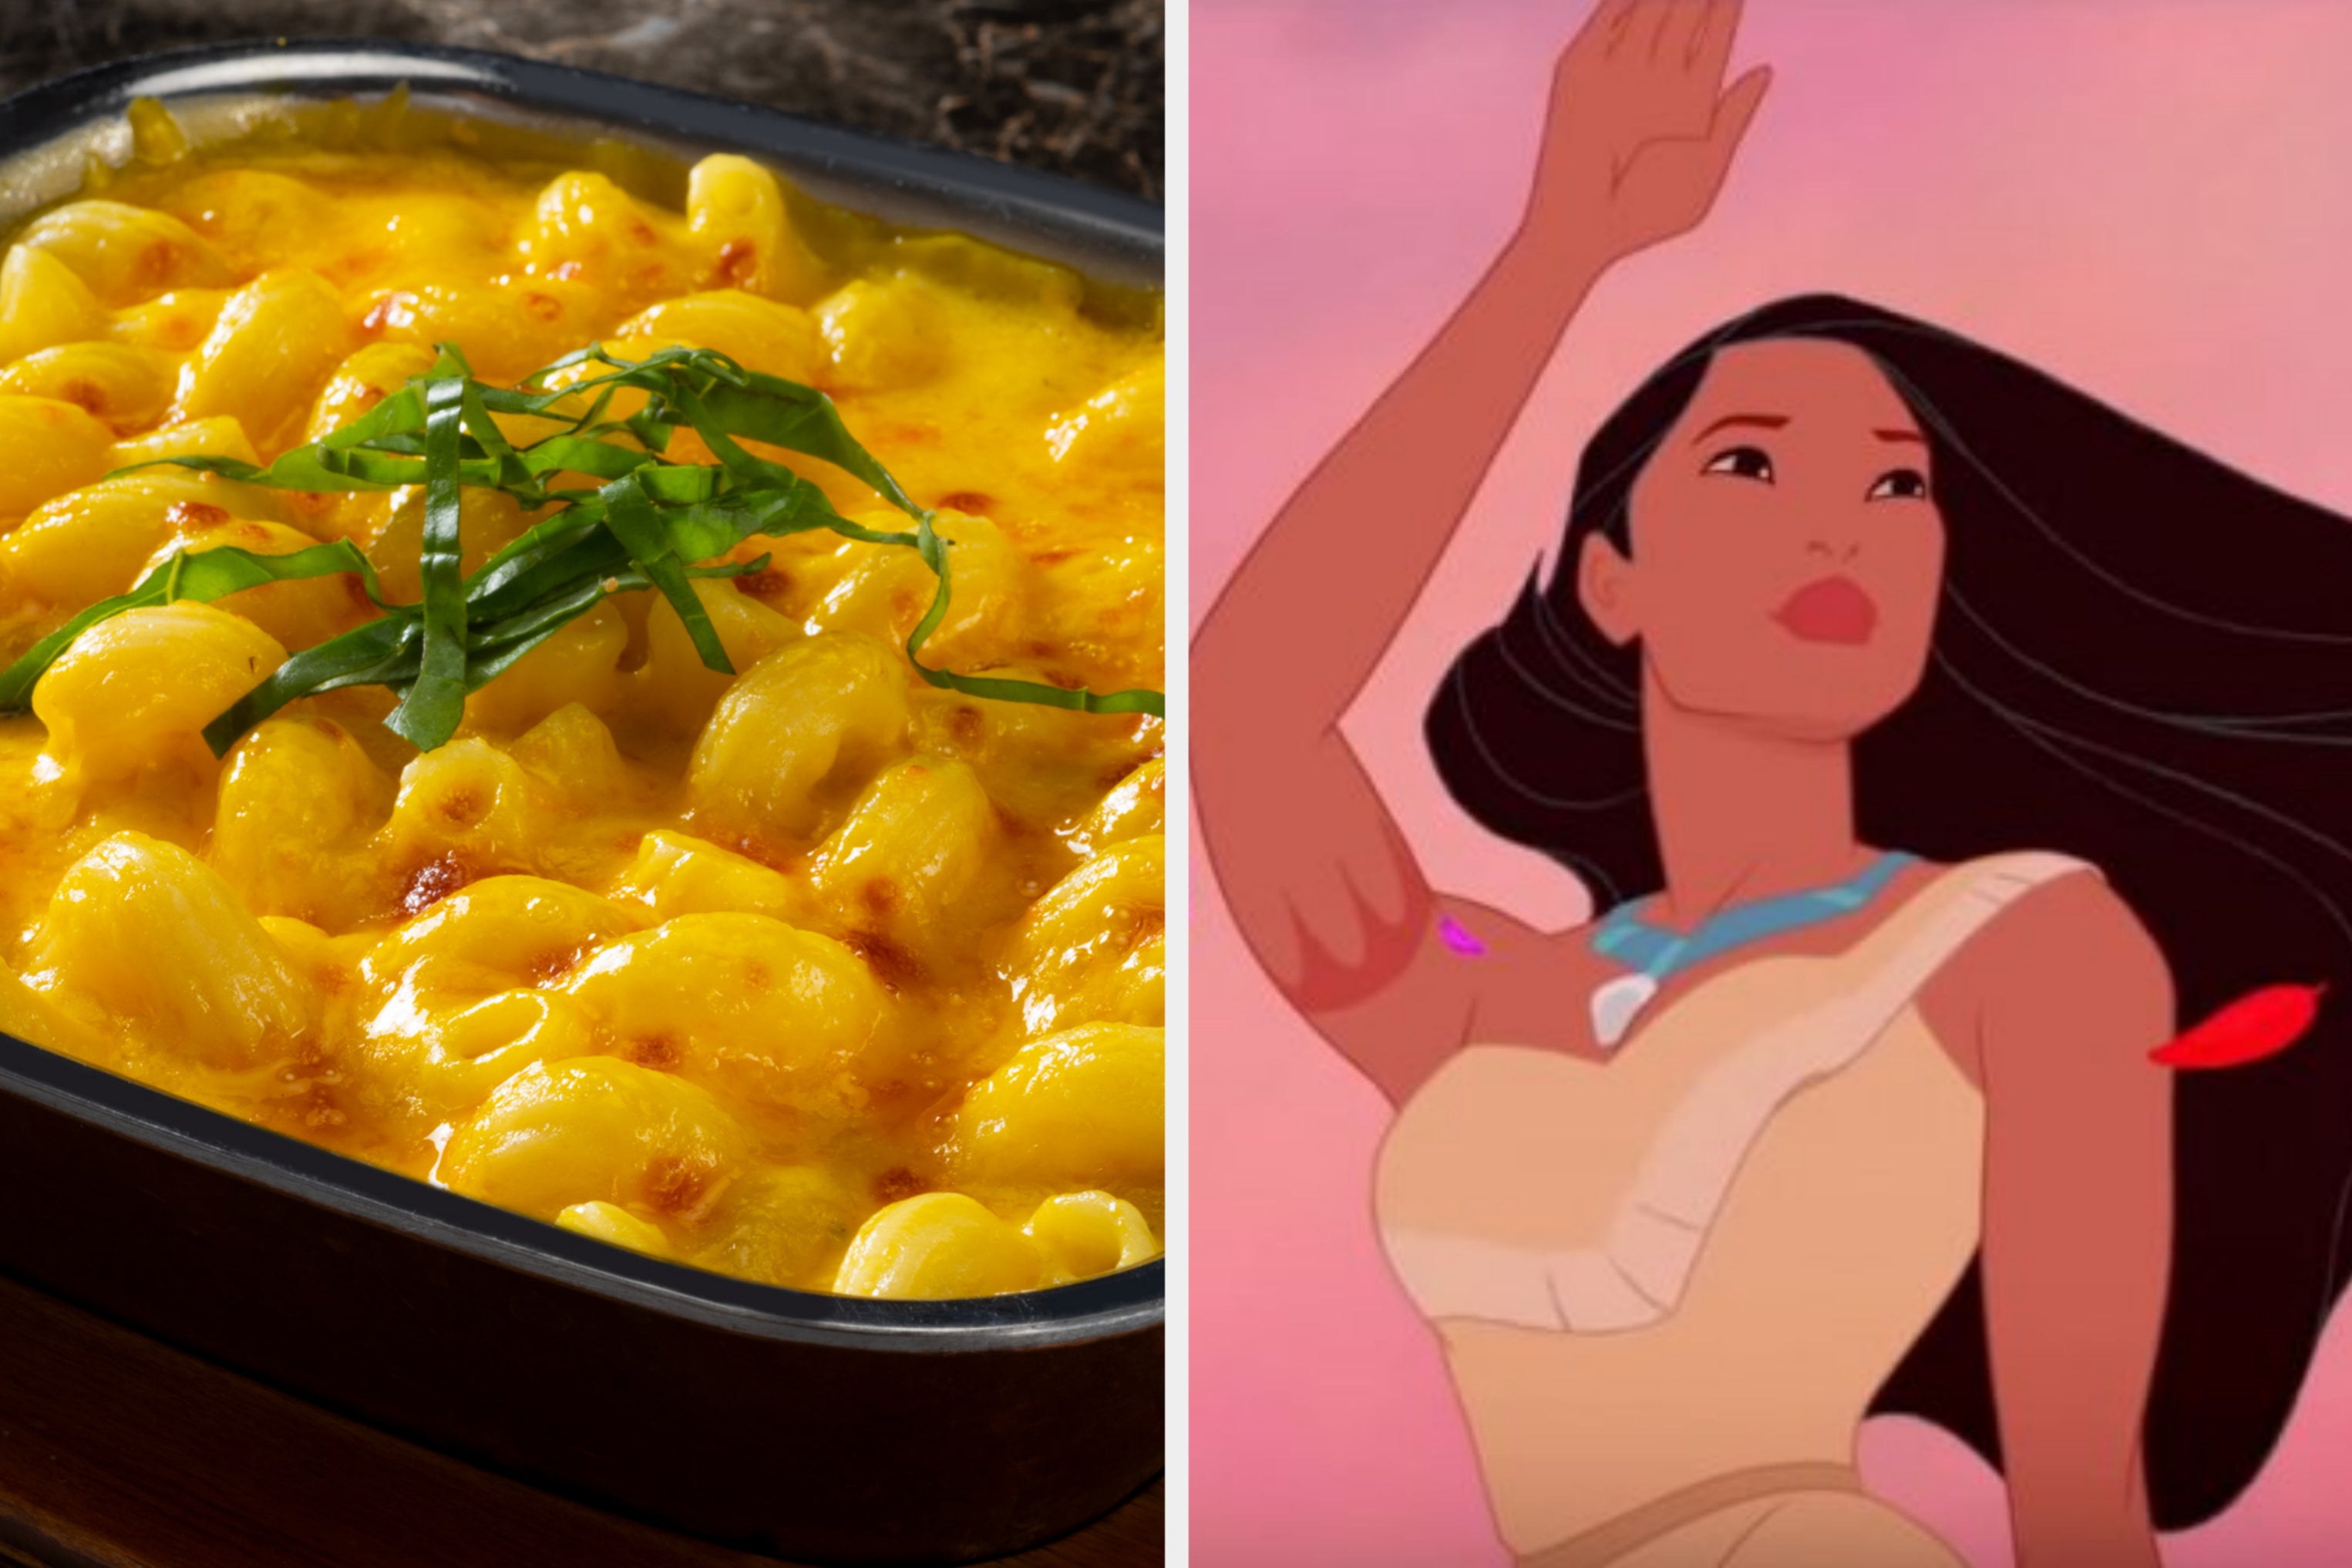 Eat At A Fancy Buffet And I'll Reveal Which Disney Princess Matches
Your Energy